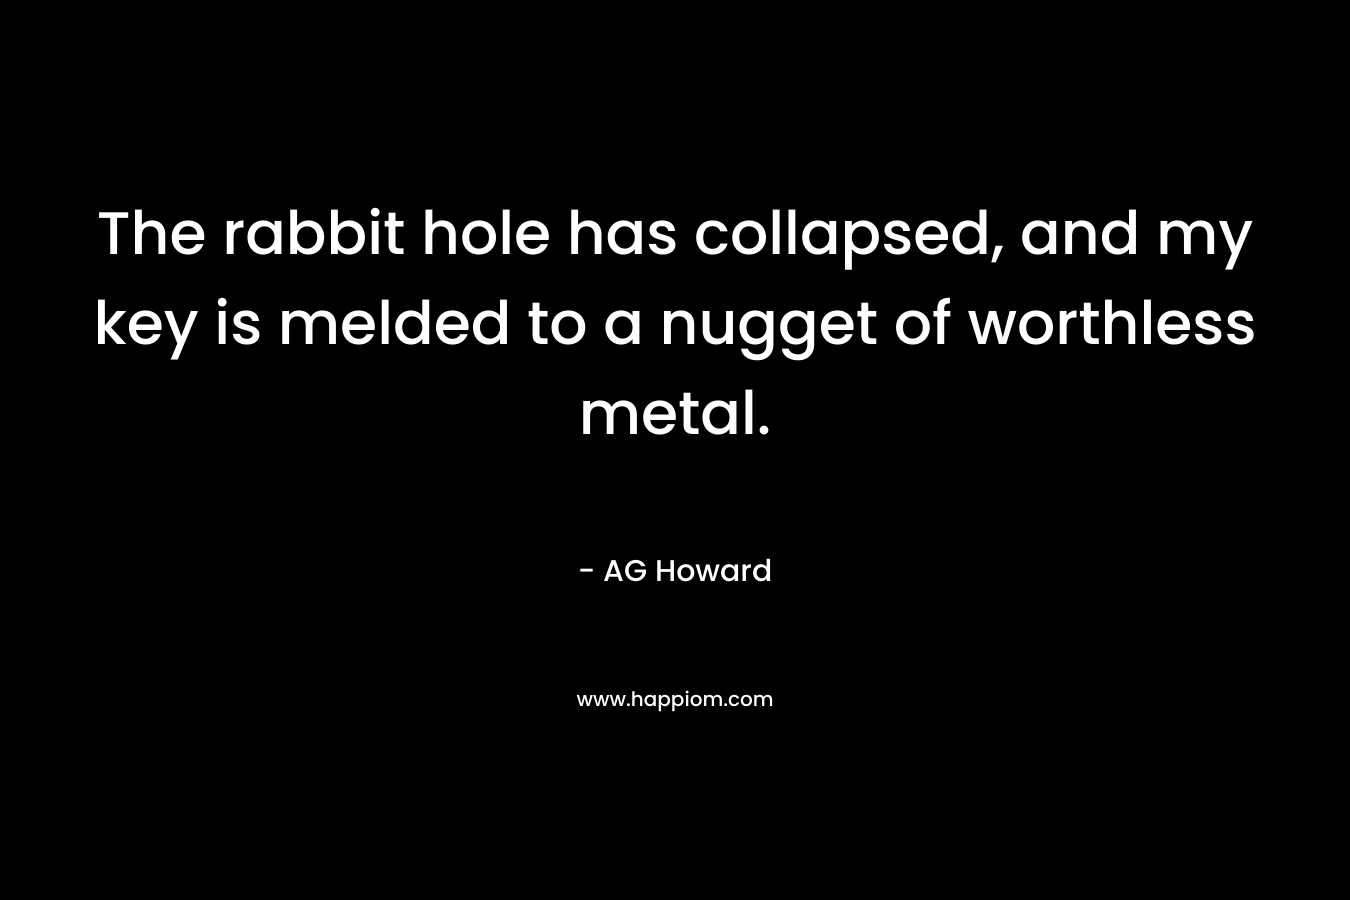 The rabbit hole has collapsed, and my key is melded to a nugget of worthless metal. – AG Howard